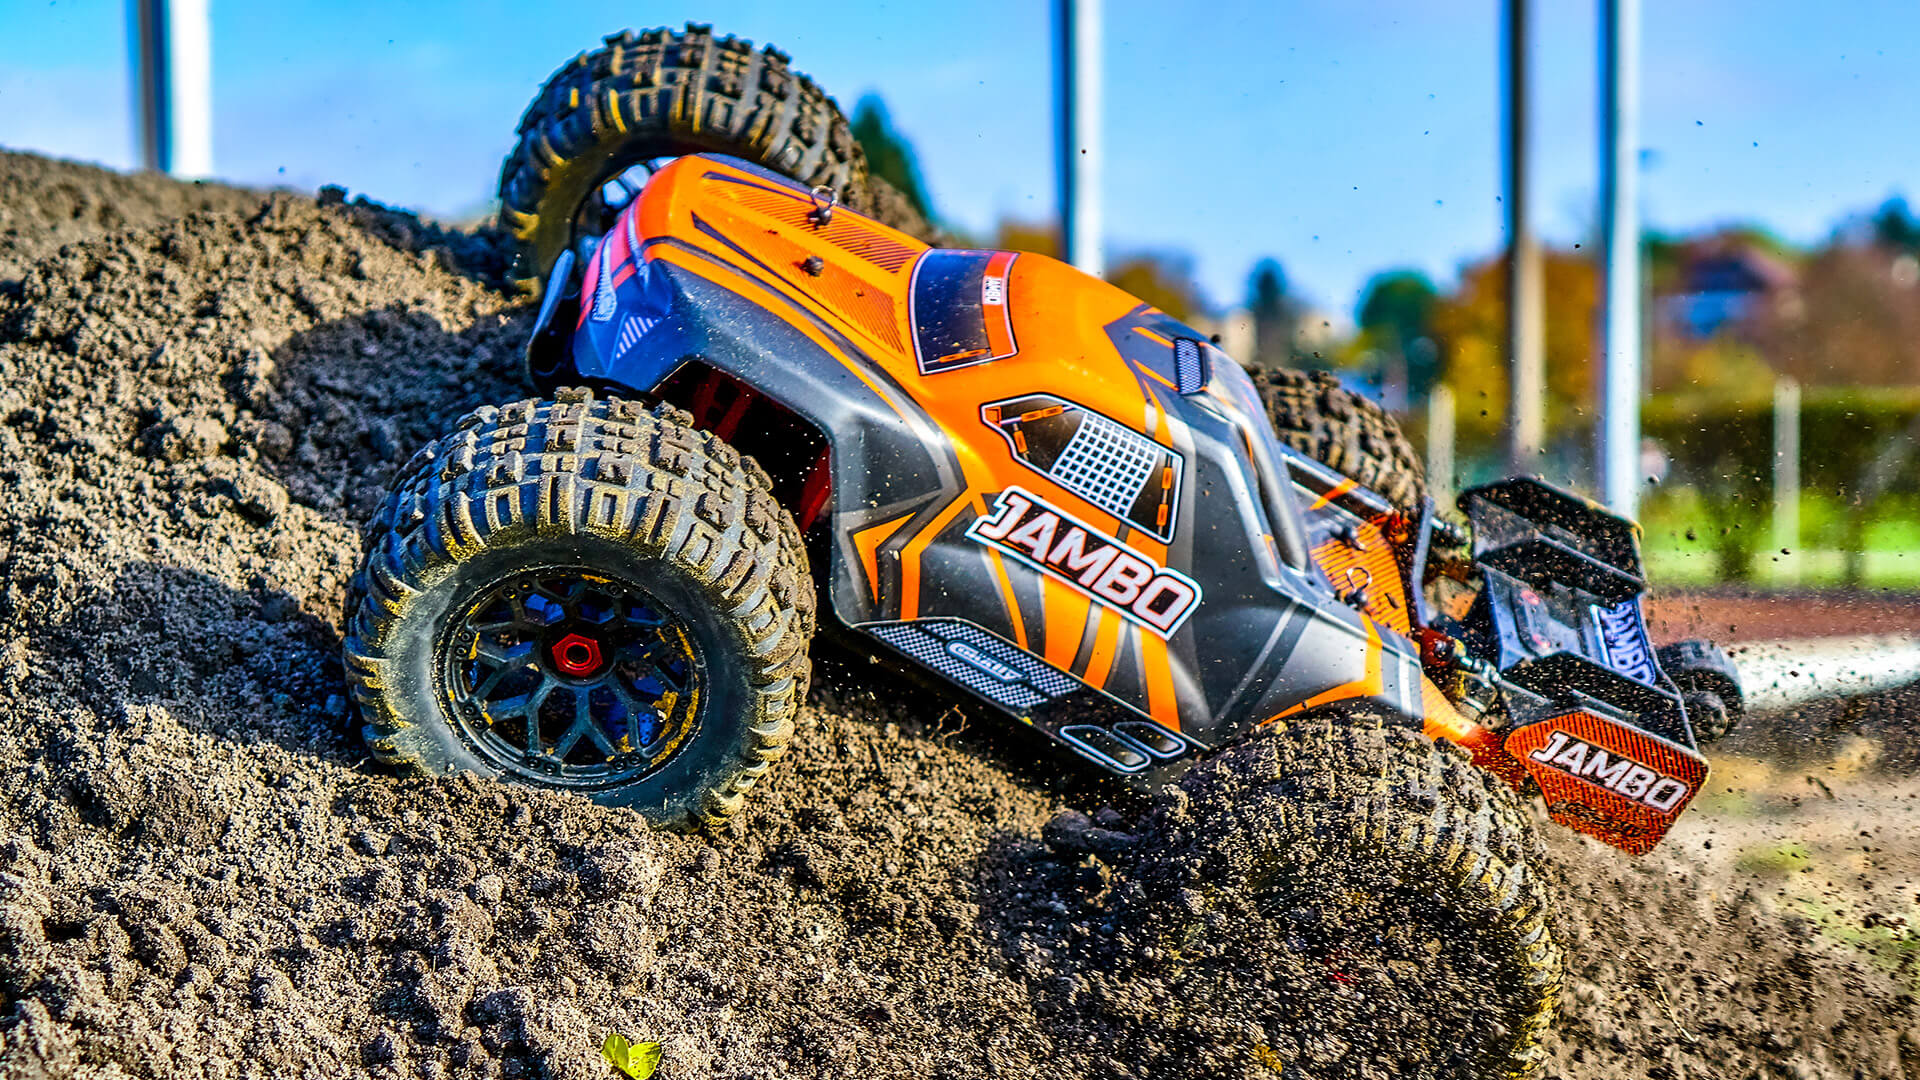 Team Corally - JAMBO XP 6S - 1/8 Monster Truck SWB - RTR - Brushless Power 6S - No Battery - No Charger